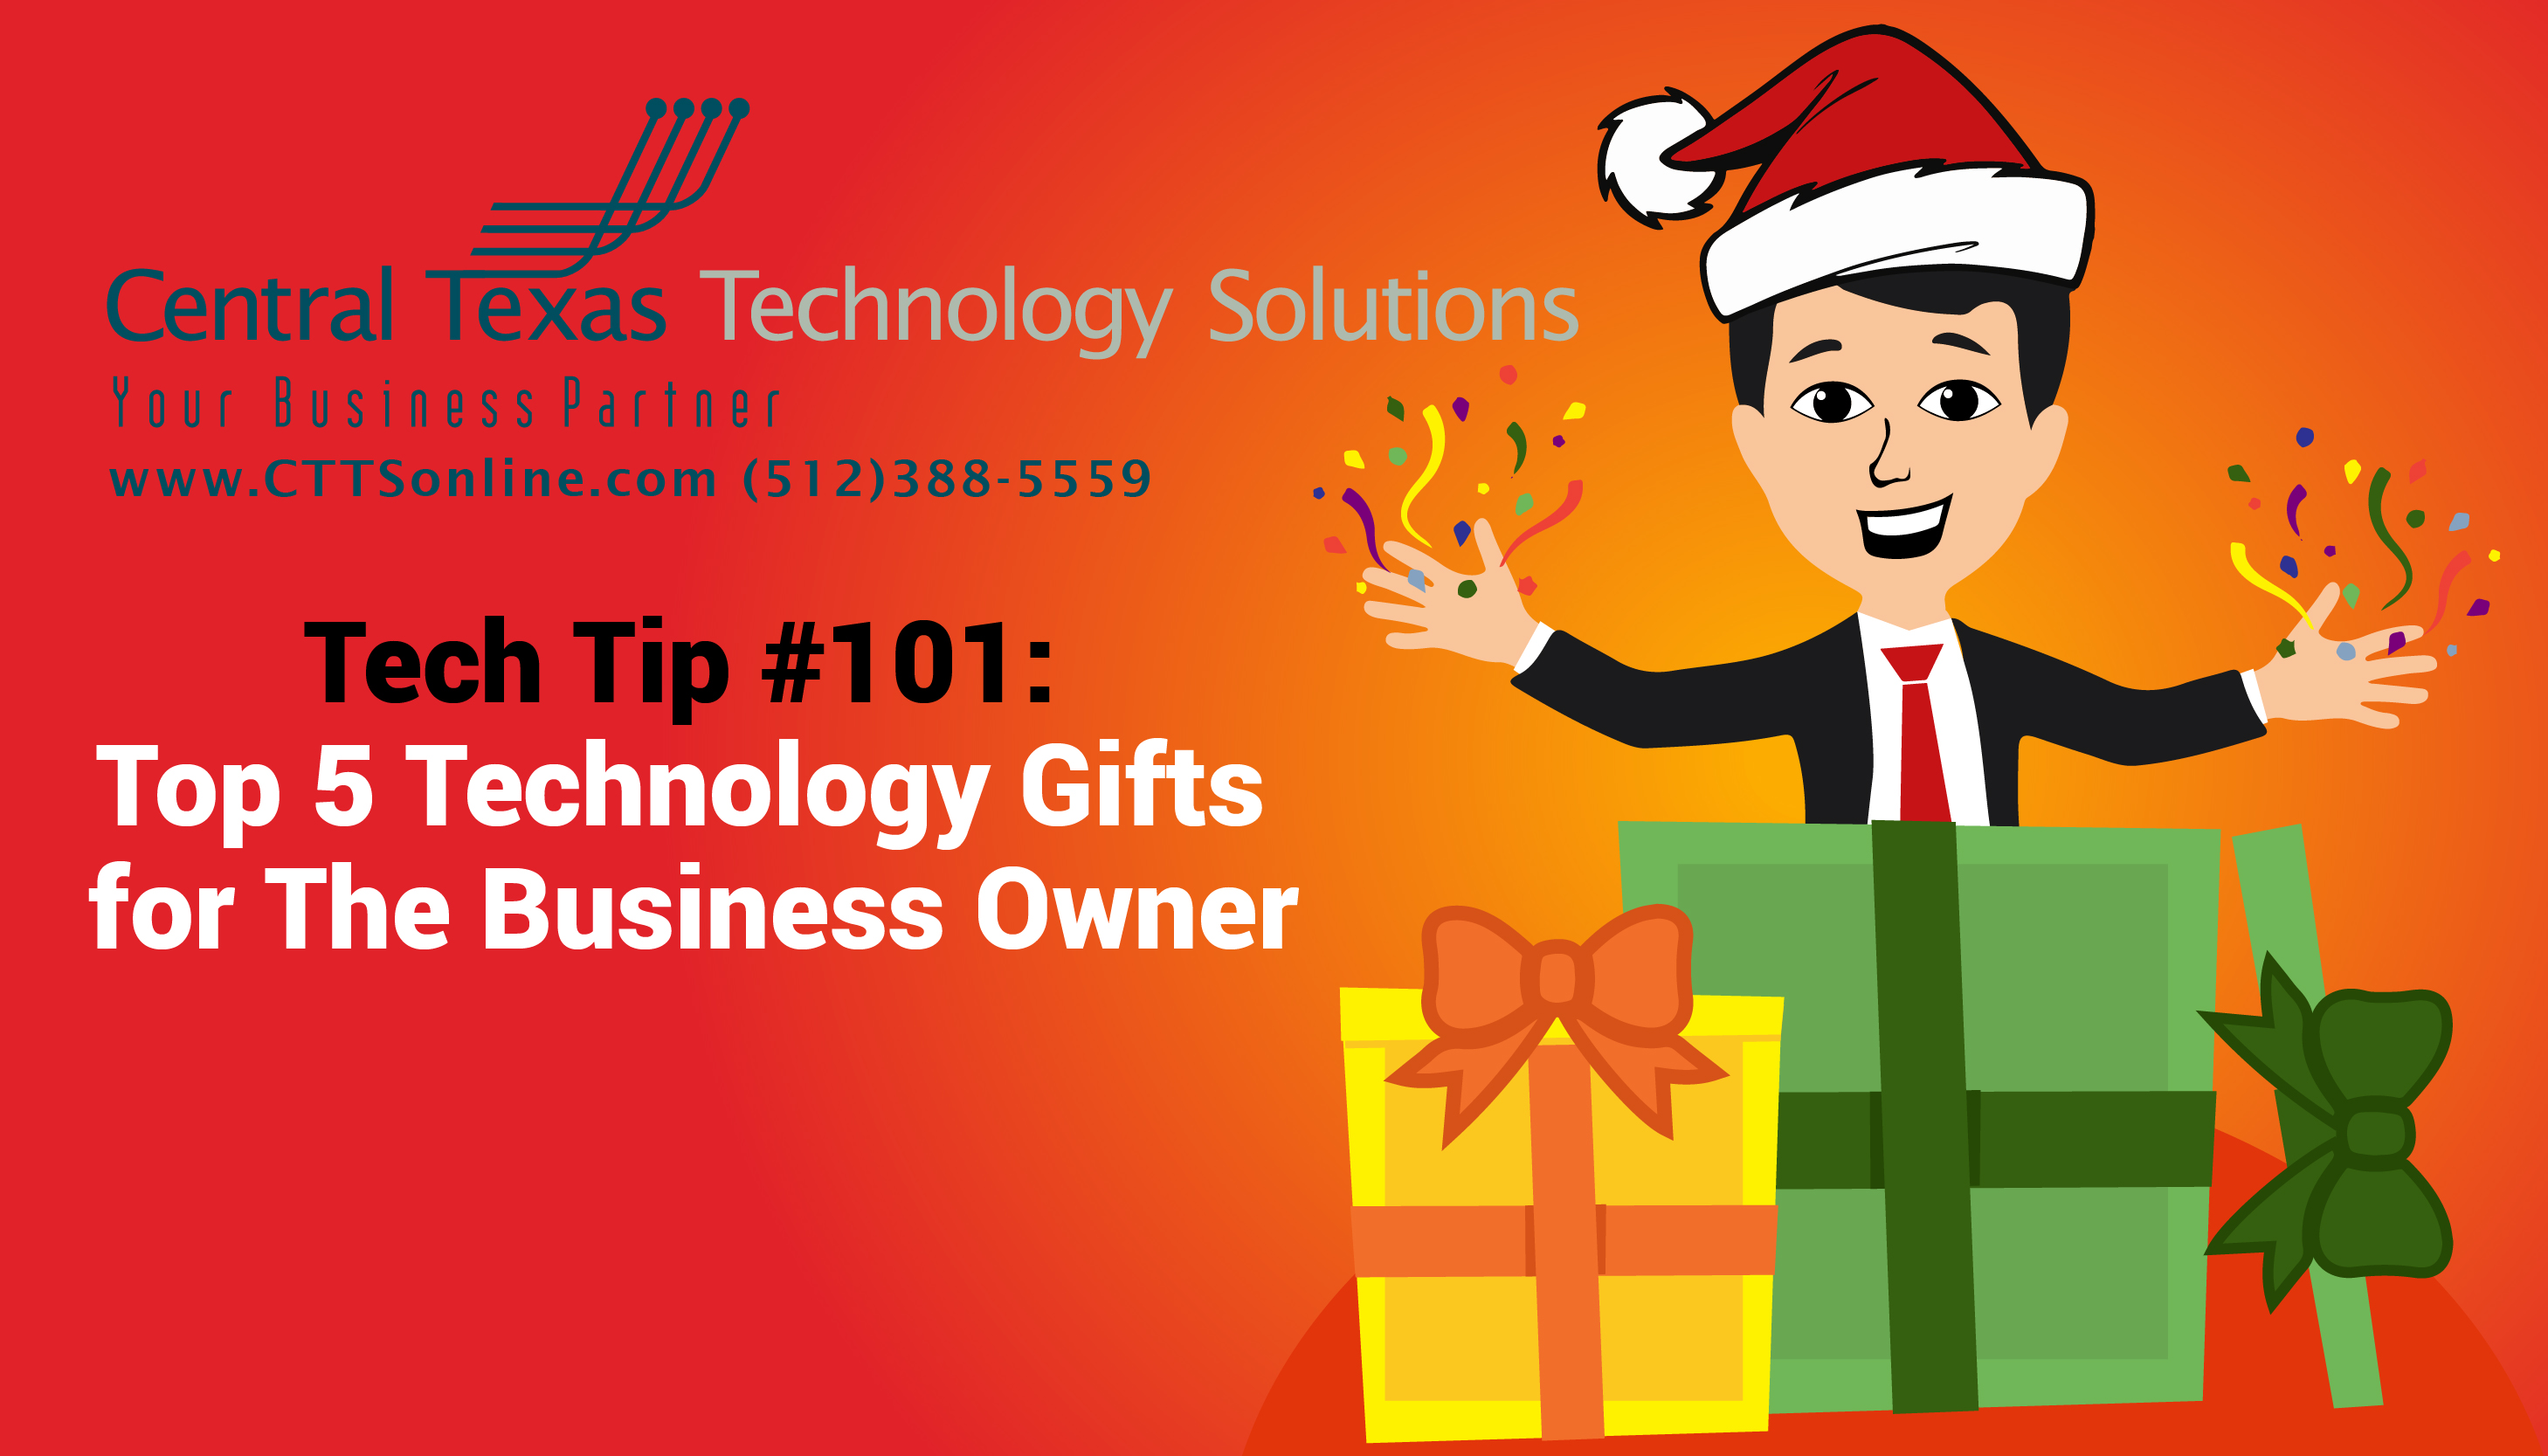 Technology gifts Georgetown TX